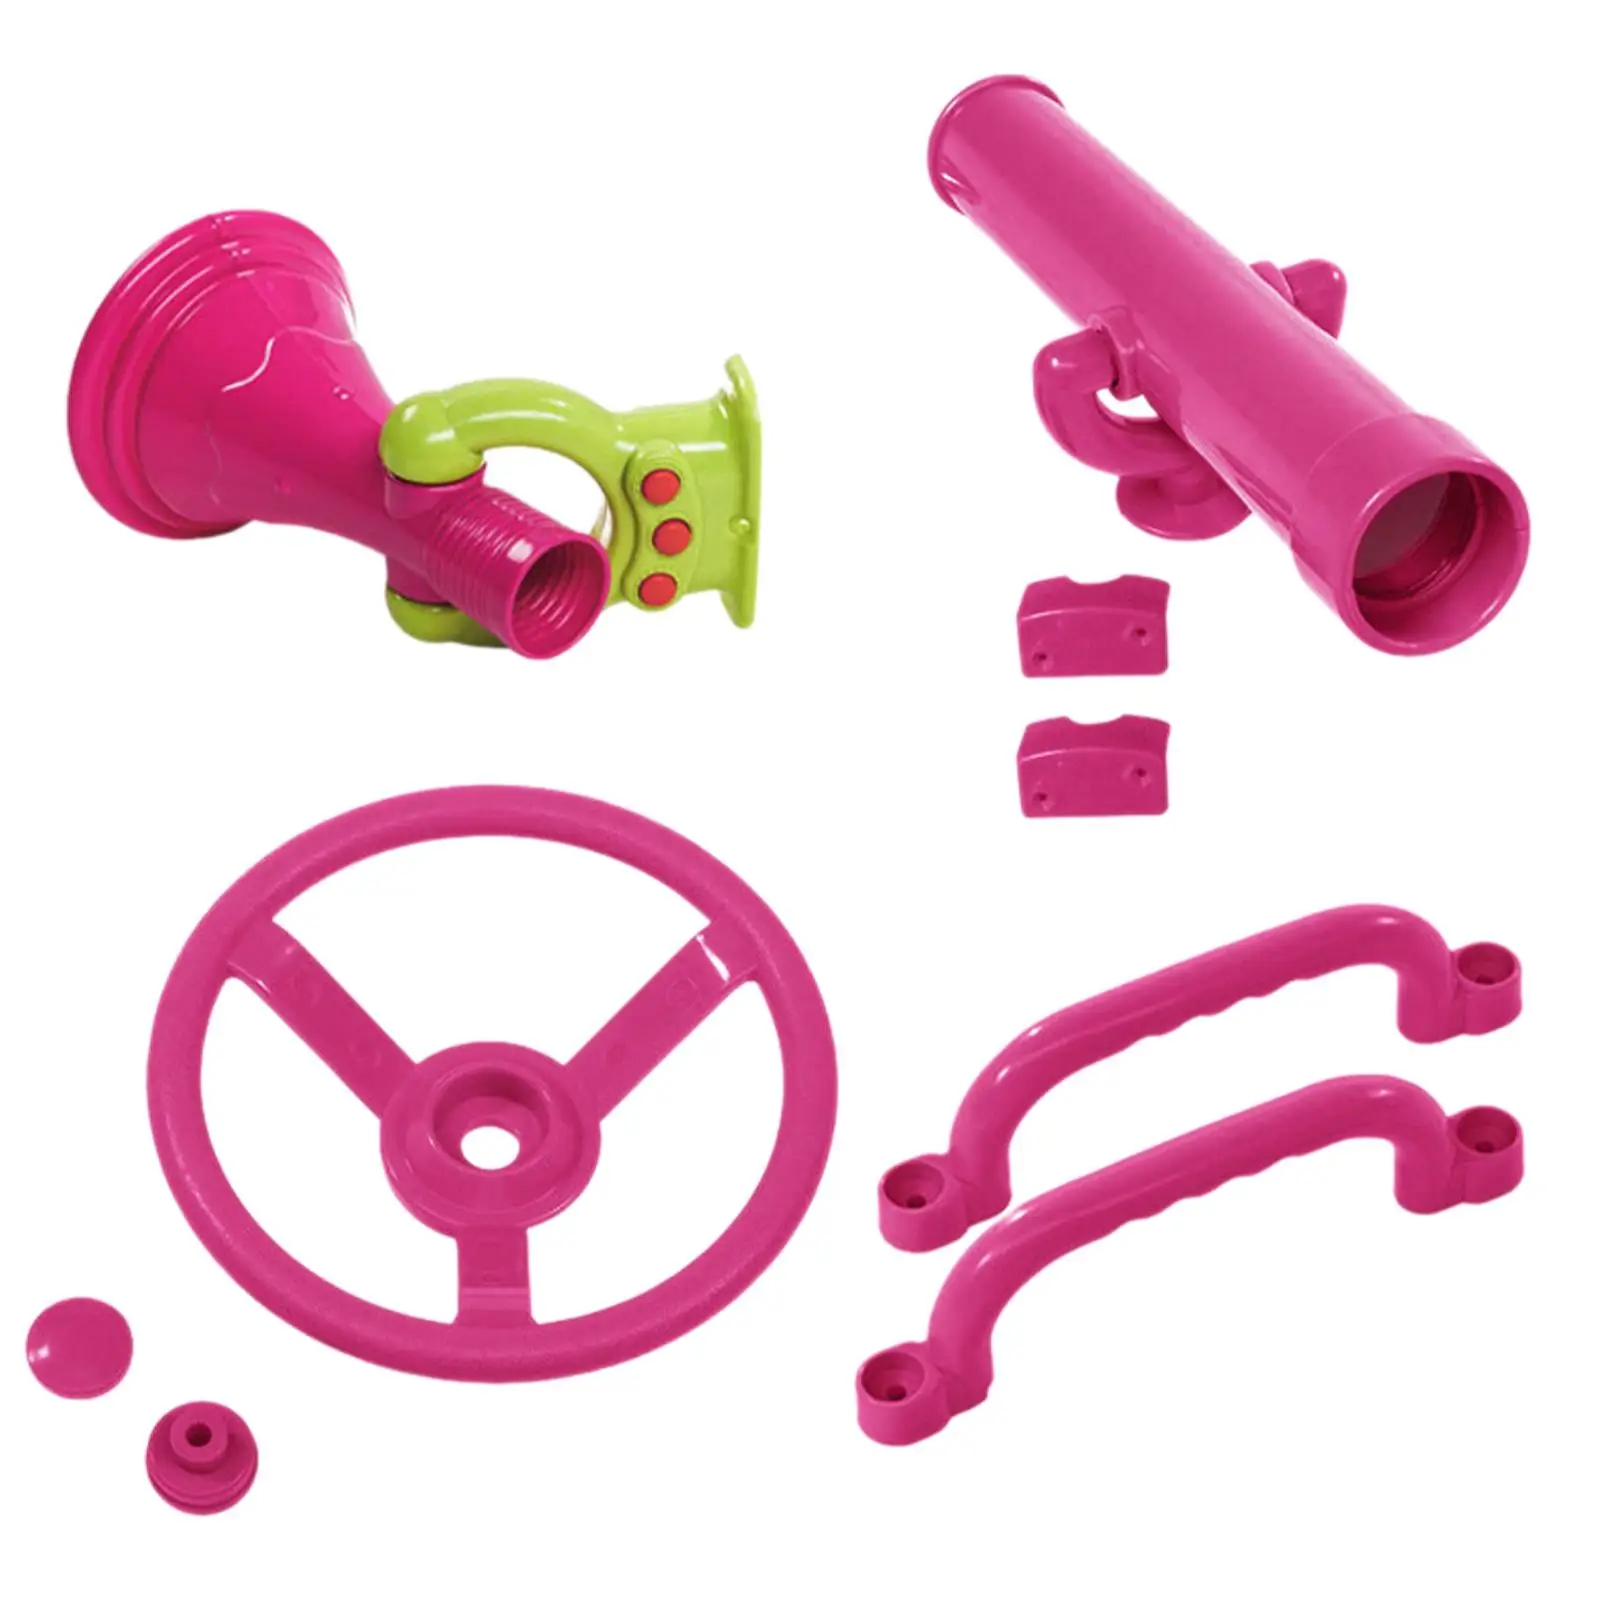 4x Playground Accessories Pink Playset Handles Pirate Ship Wheel for Kids for Backyard Swingset Outdoor Playhouse Boys Girls